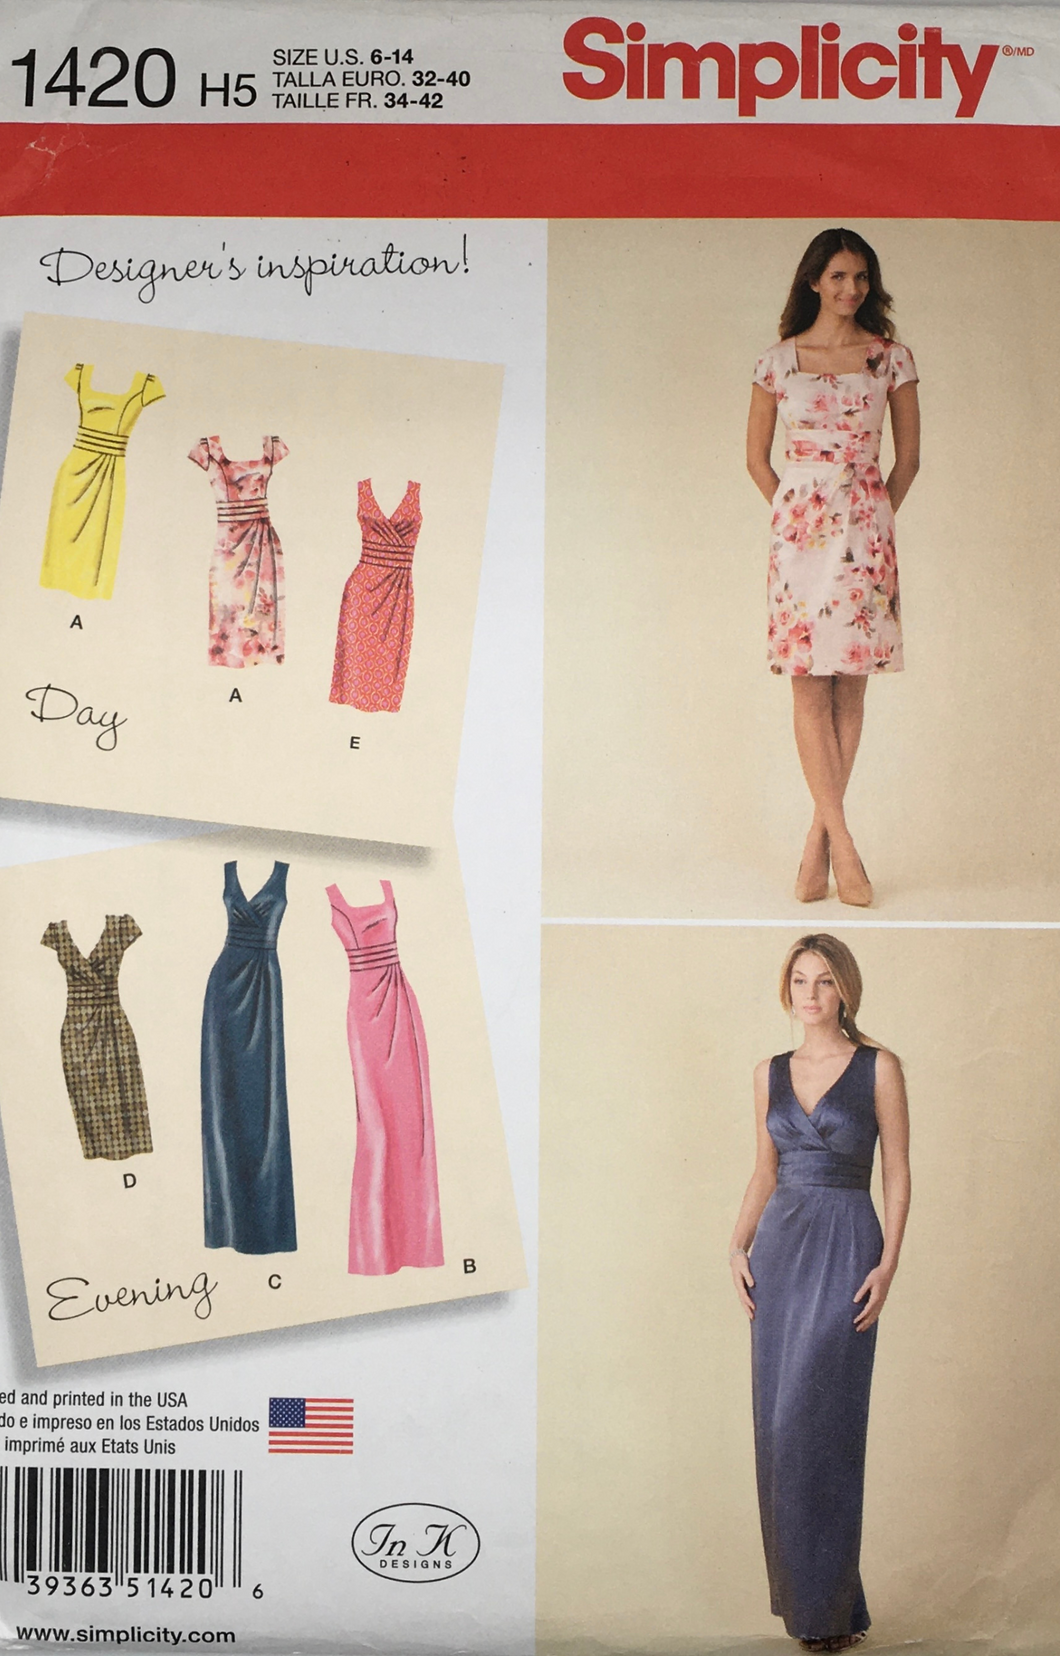 2014 Sewing Pattern: Simplicity 1420